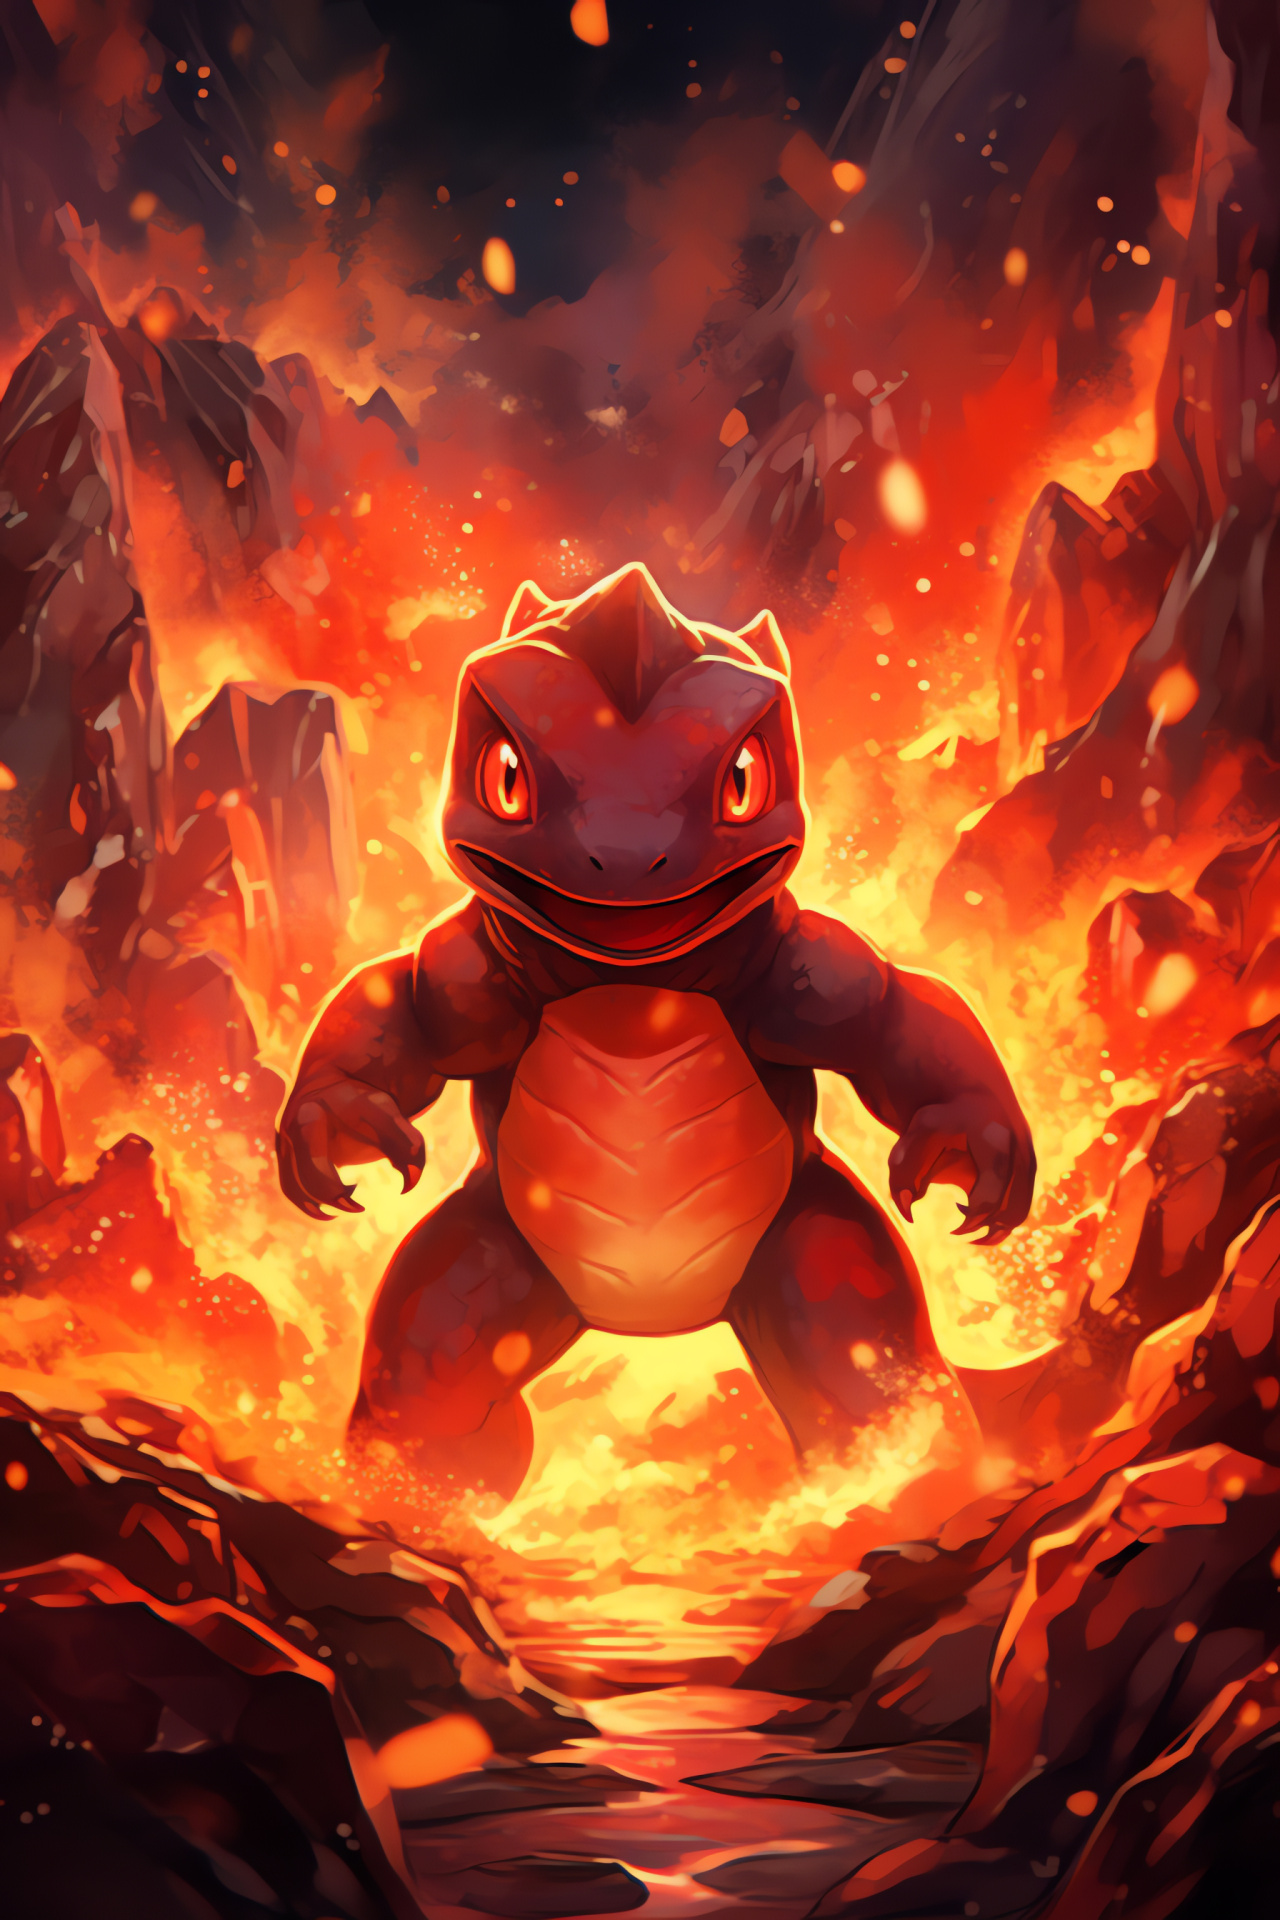 Fiery Charmeleon, Volcano prowess, Lava spit, Eruptive nature, Simmering anger, HD Phone Wallpaper